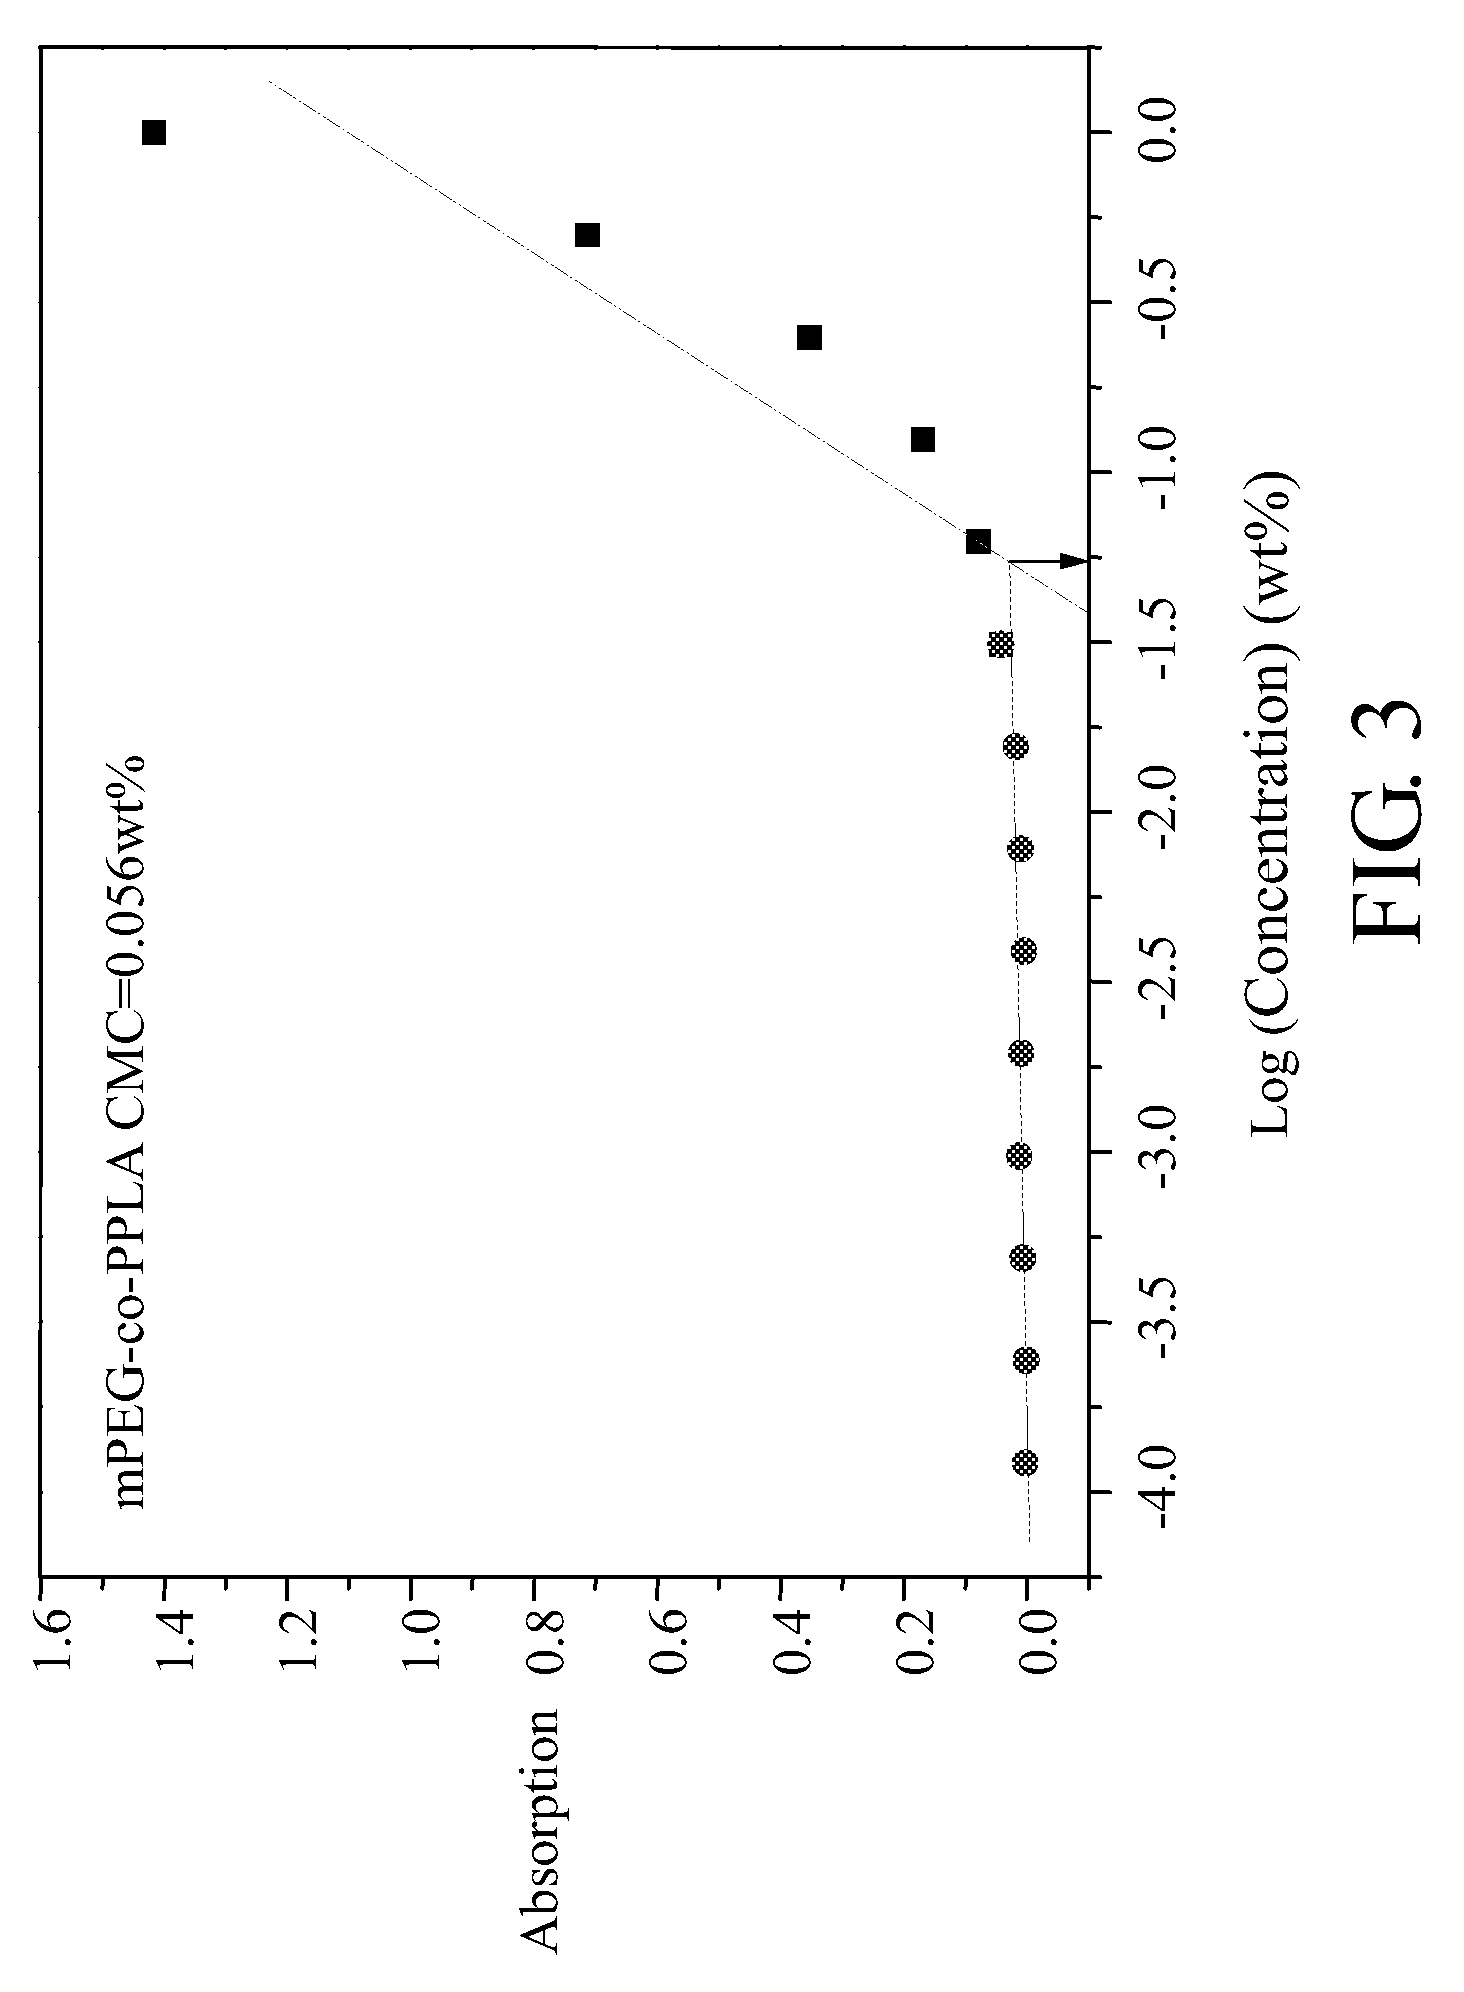 Biodegradable copolymer and thermosensitive material